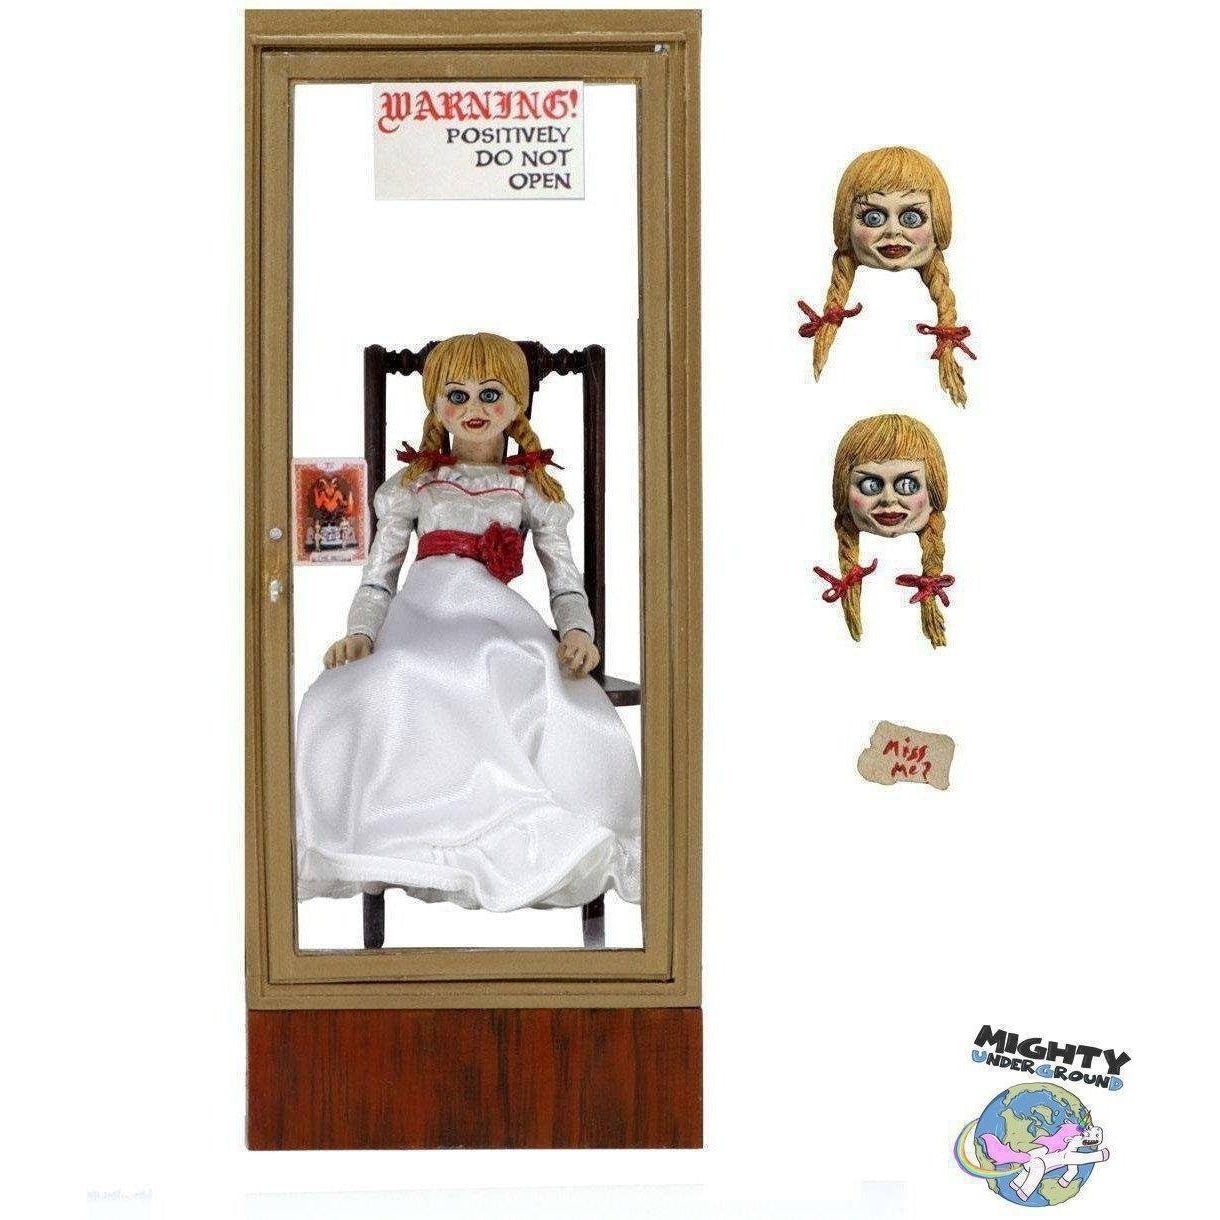 Annabelle Comes Home: Ultimate Annabelle-Actionfiguren-NECA-mighty-underground